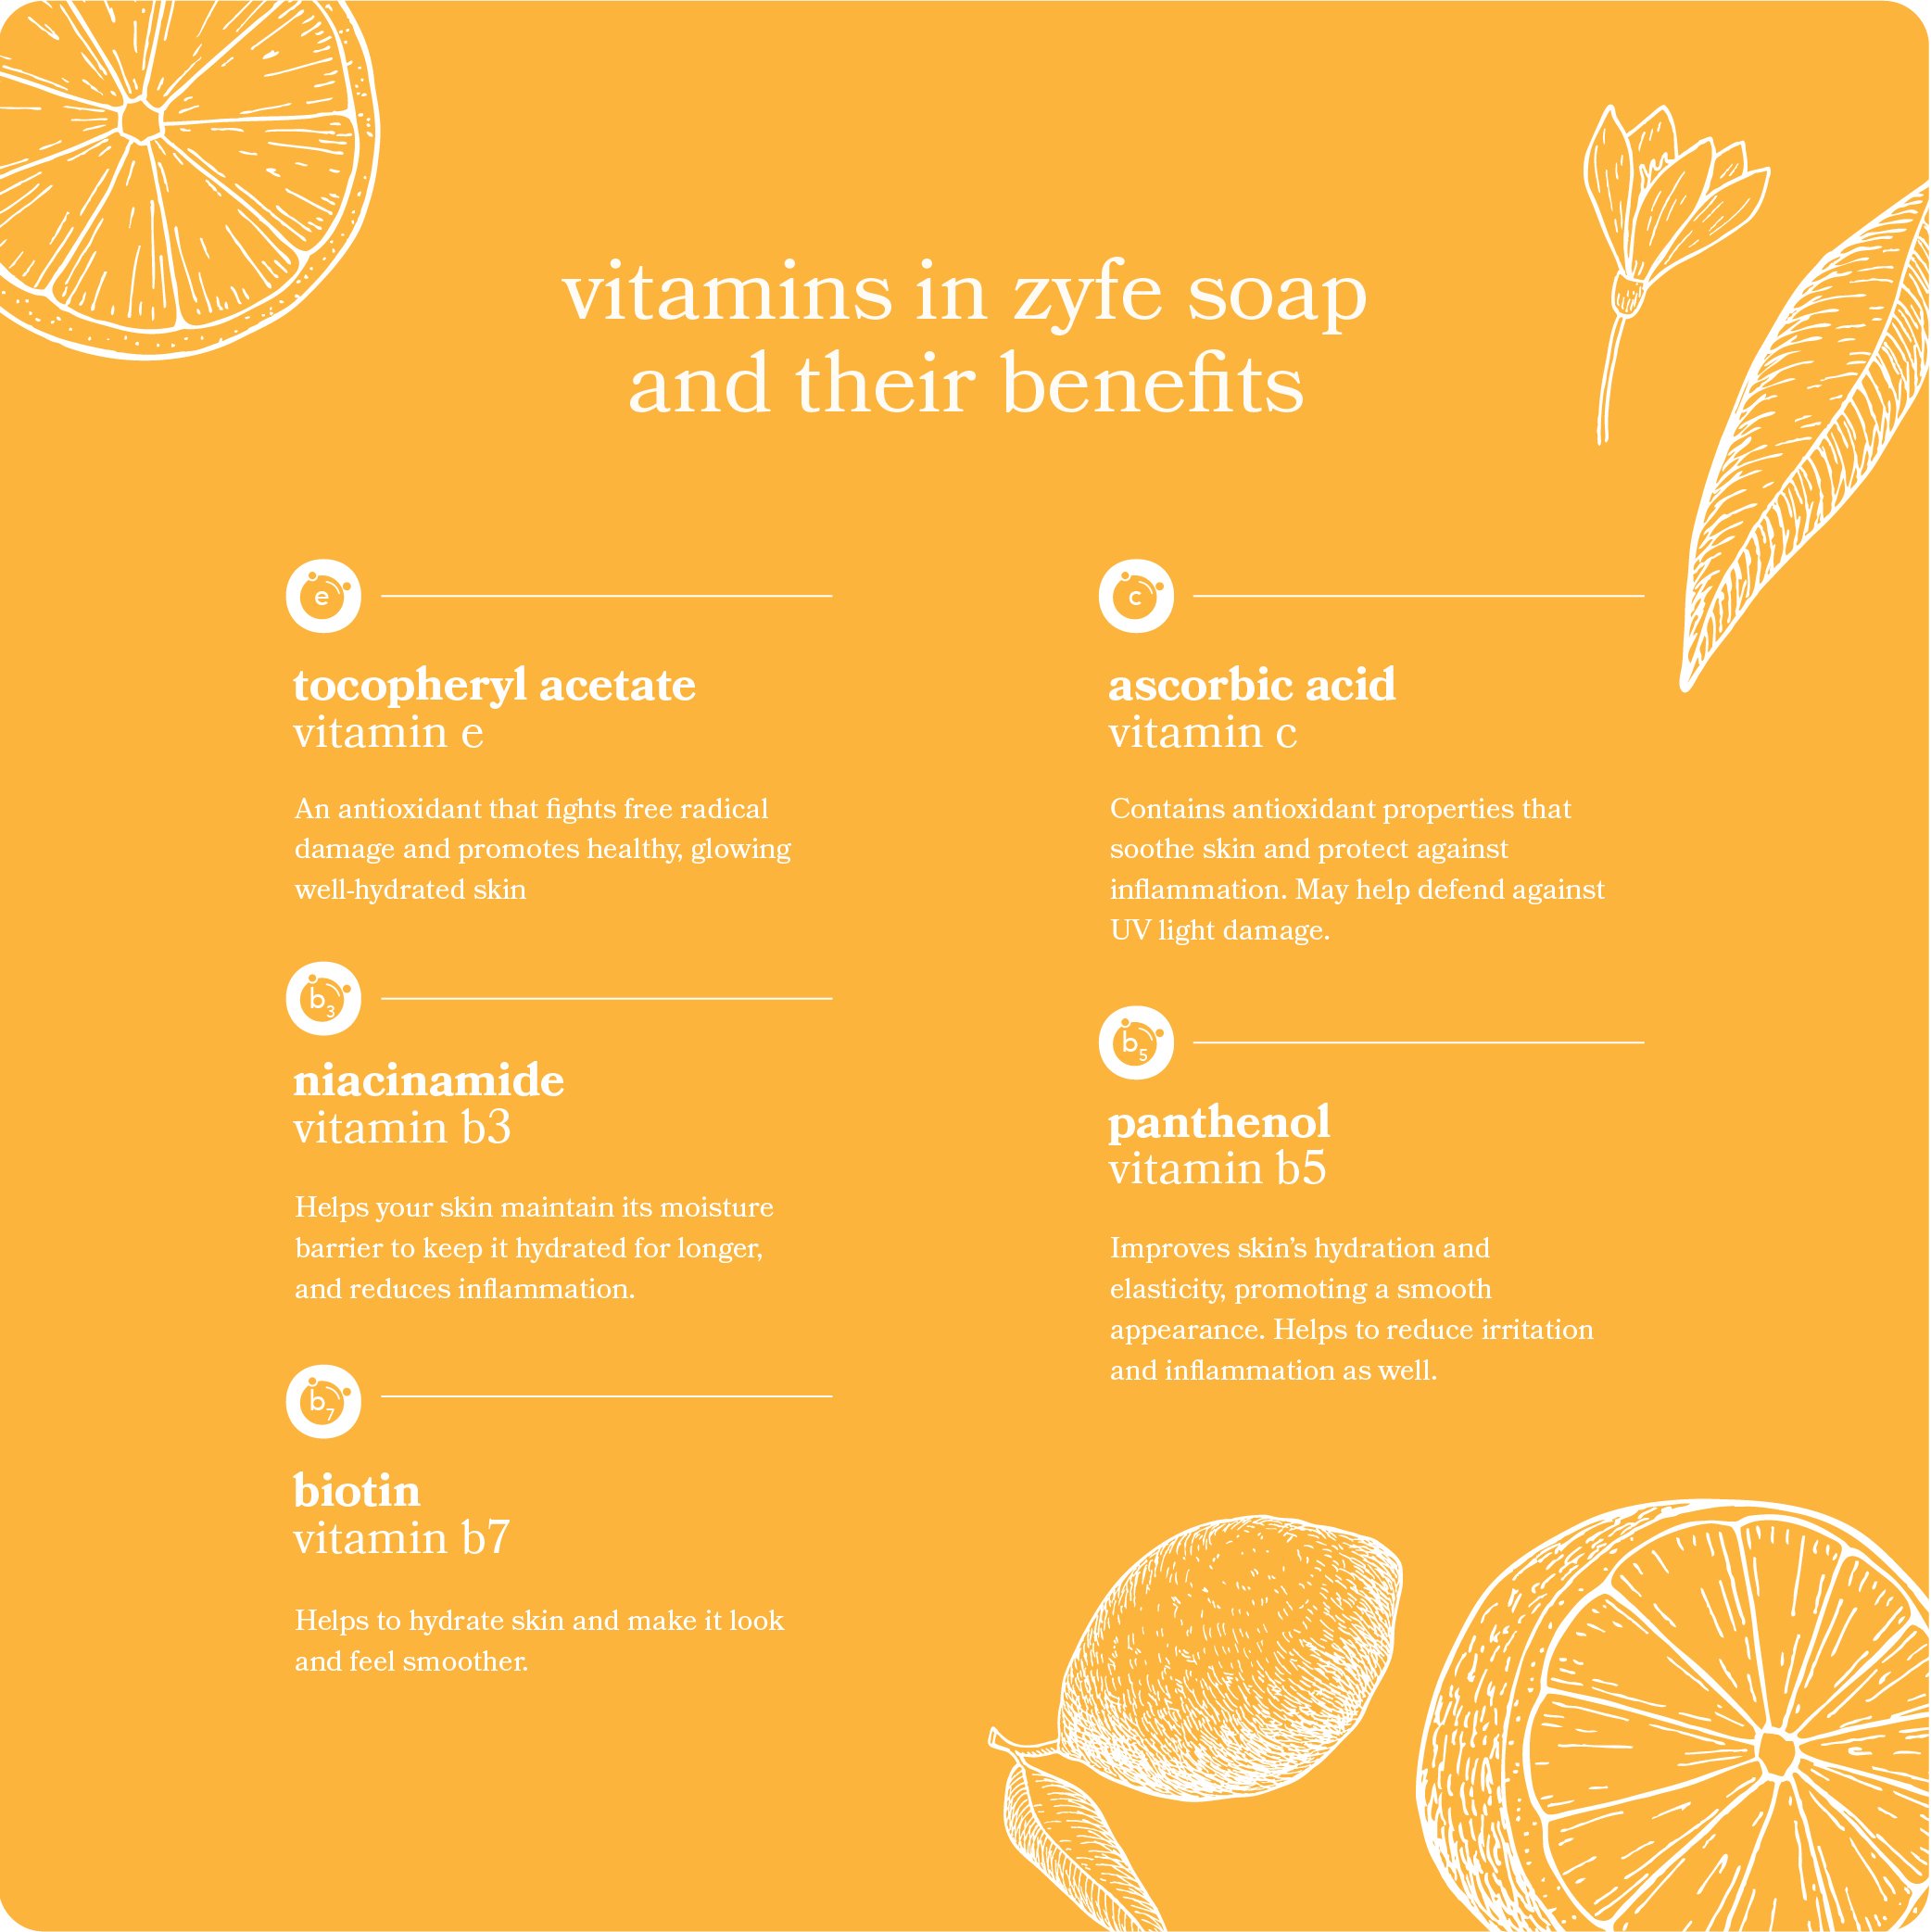 infographic describing the benefits of the vitamins in zyfe soap